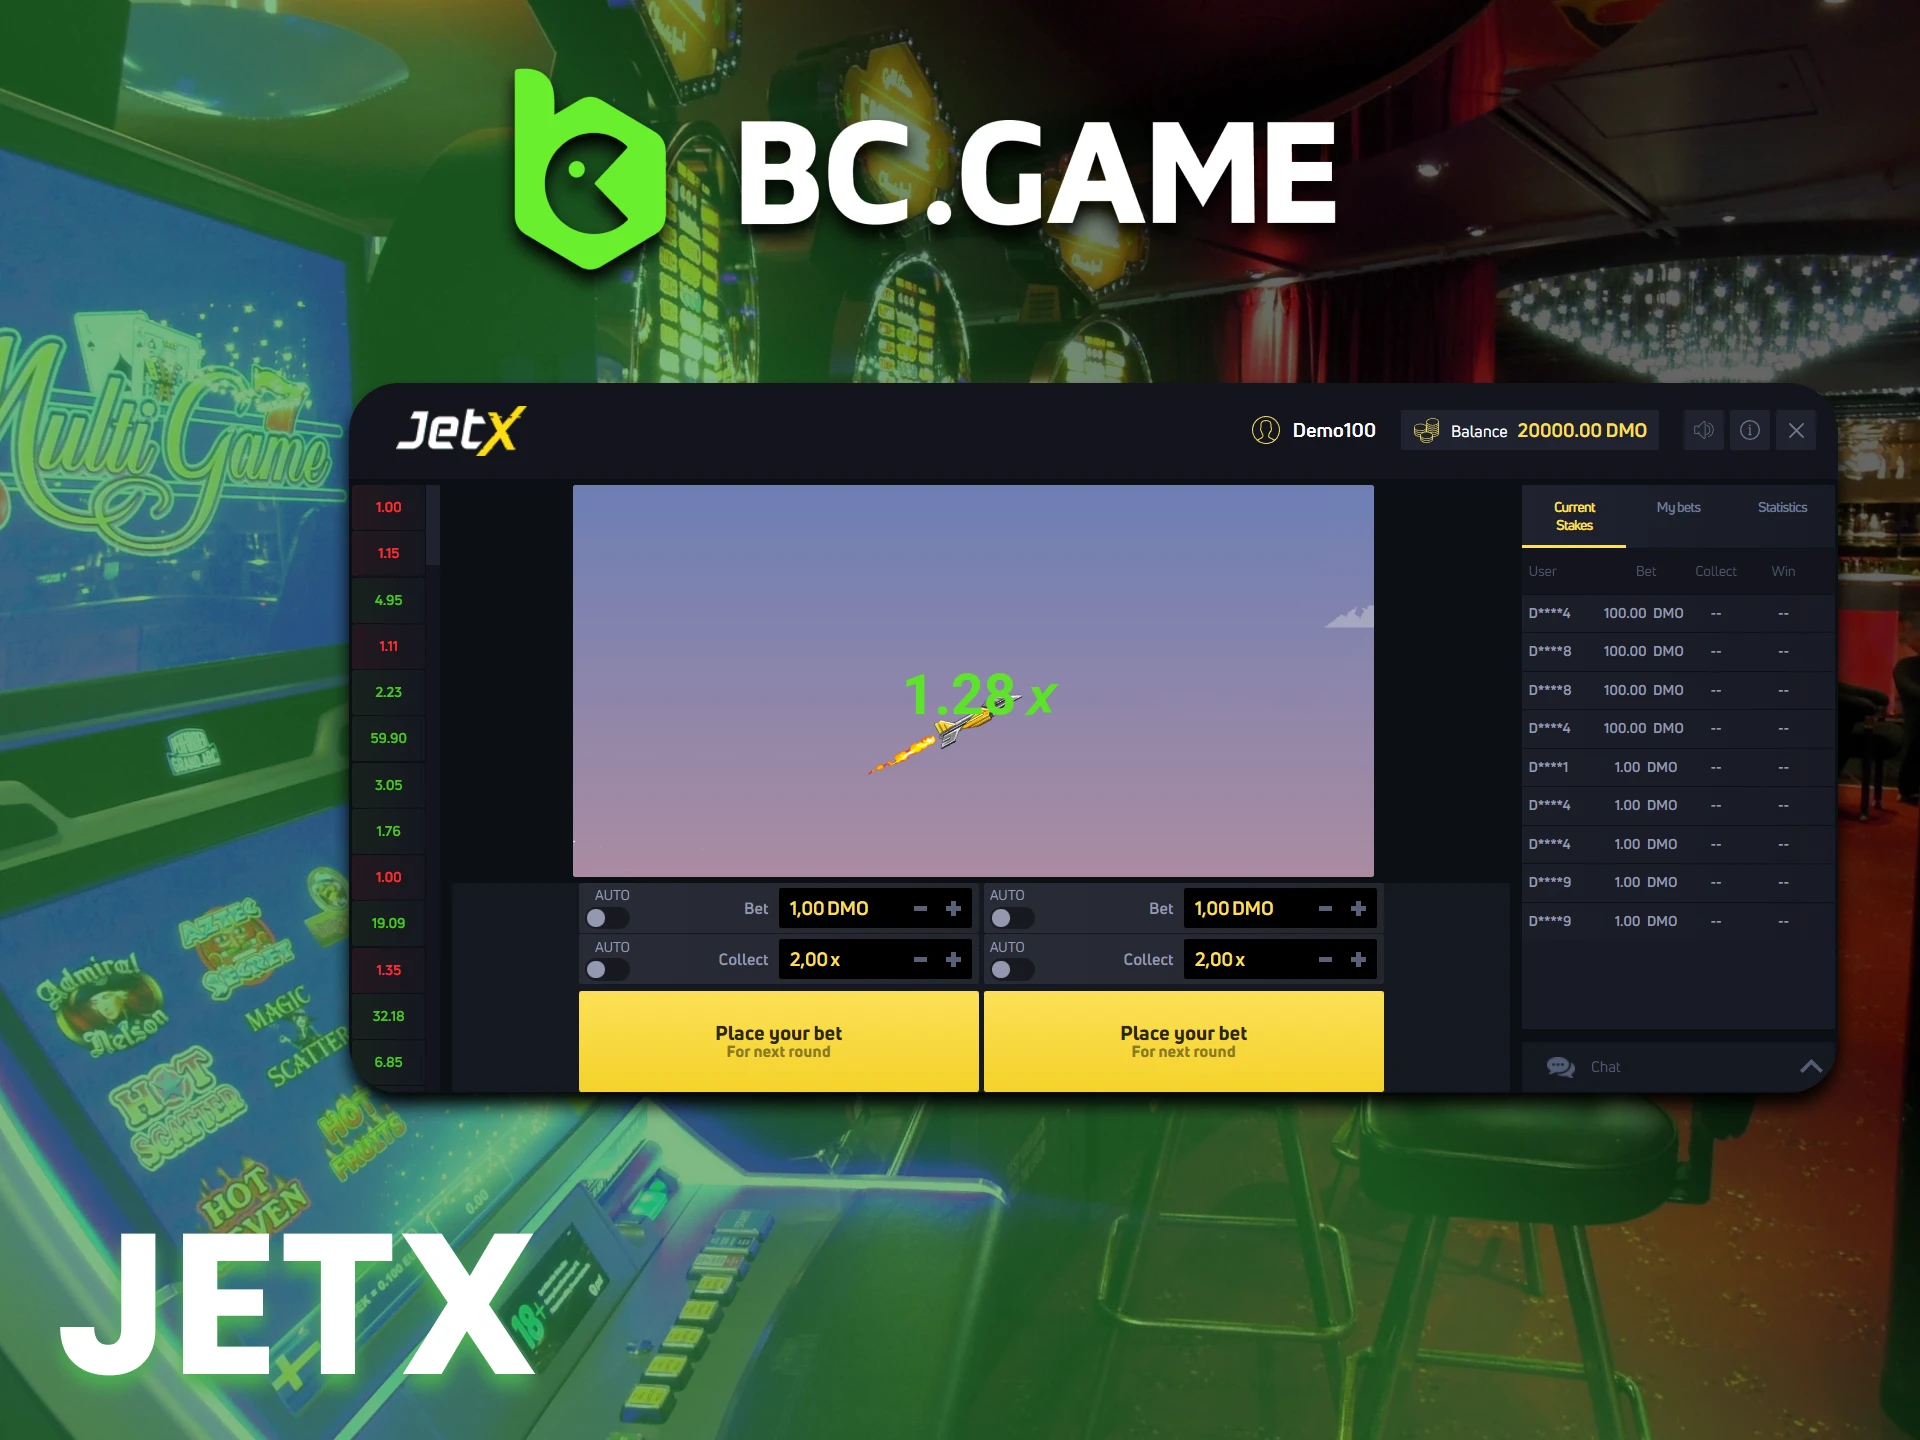 Bet on most profitable rockets in JetX at BC Game casino.